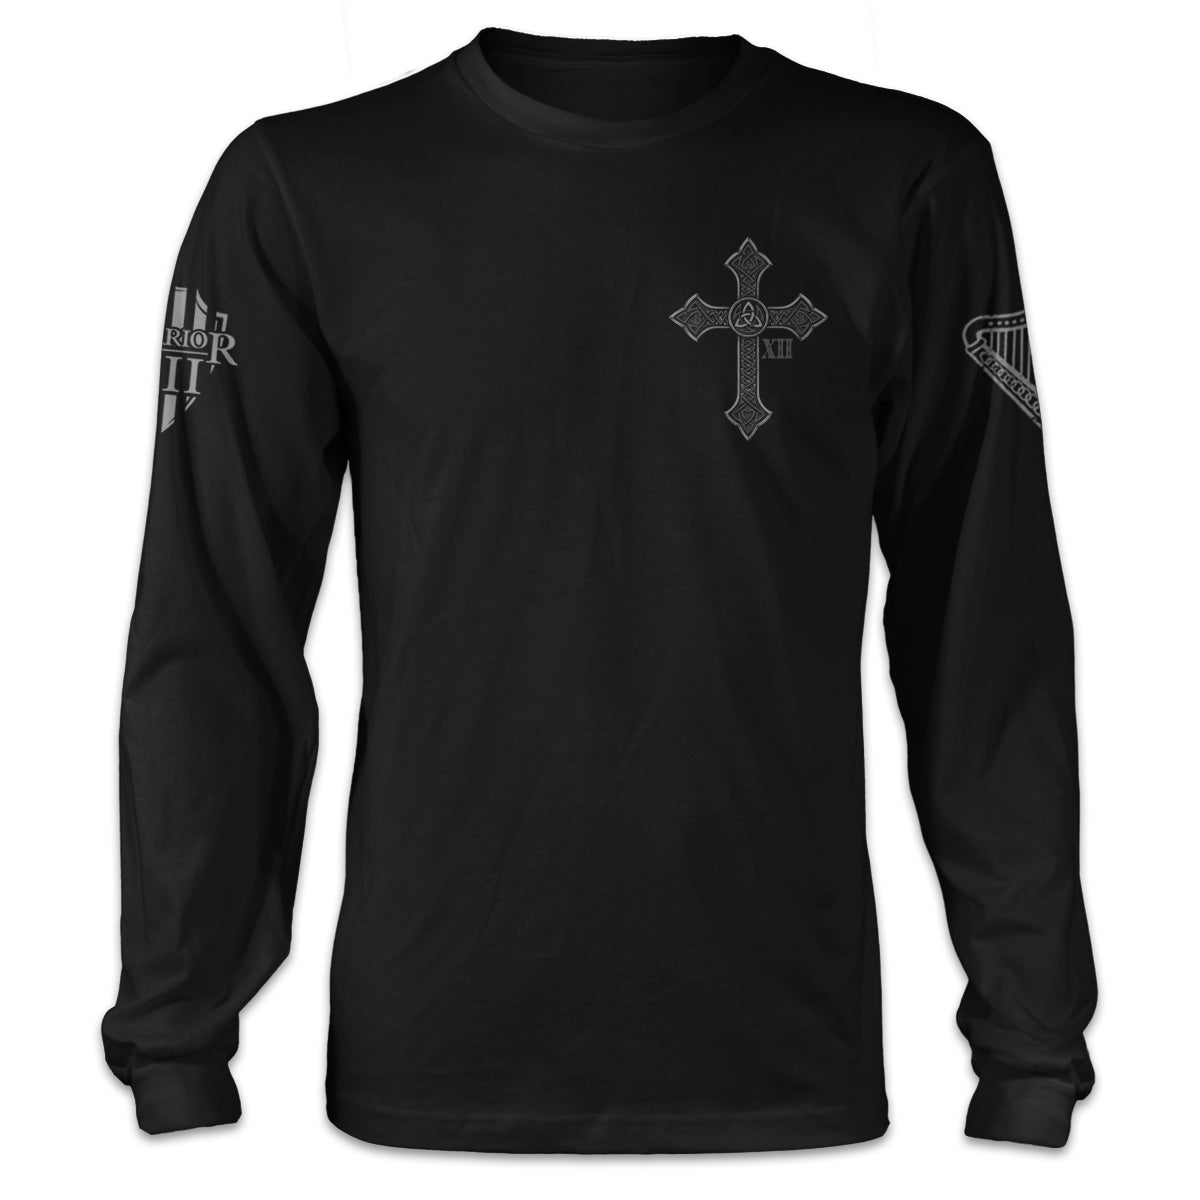 A black long sleeve shirt with across printed on the front of the shirt.